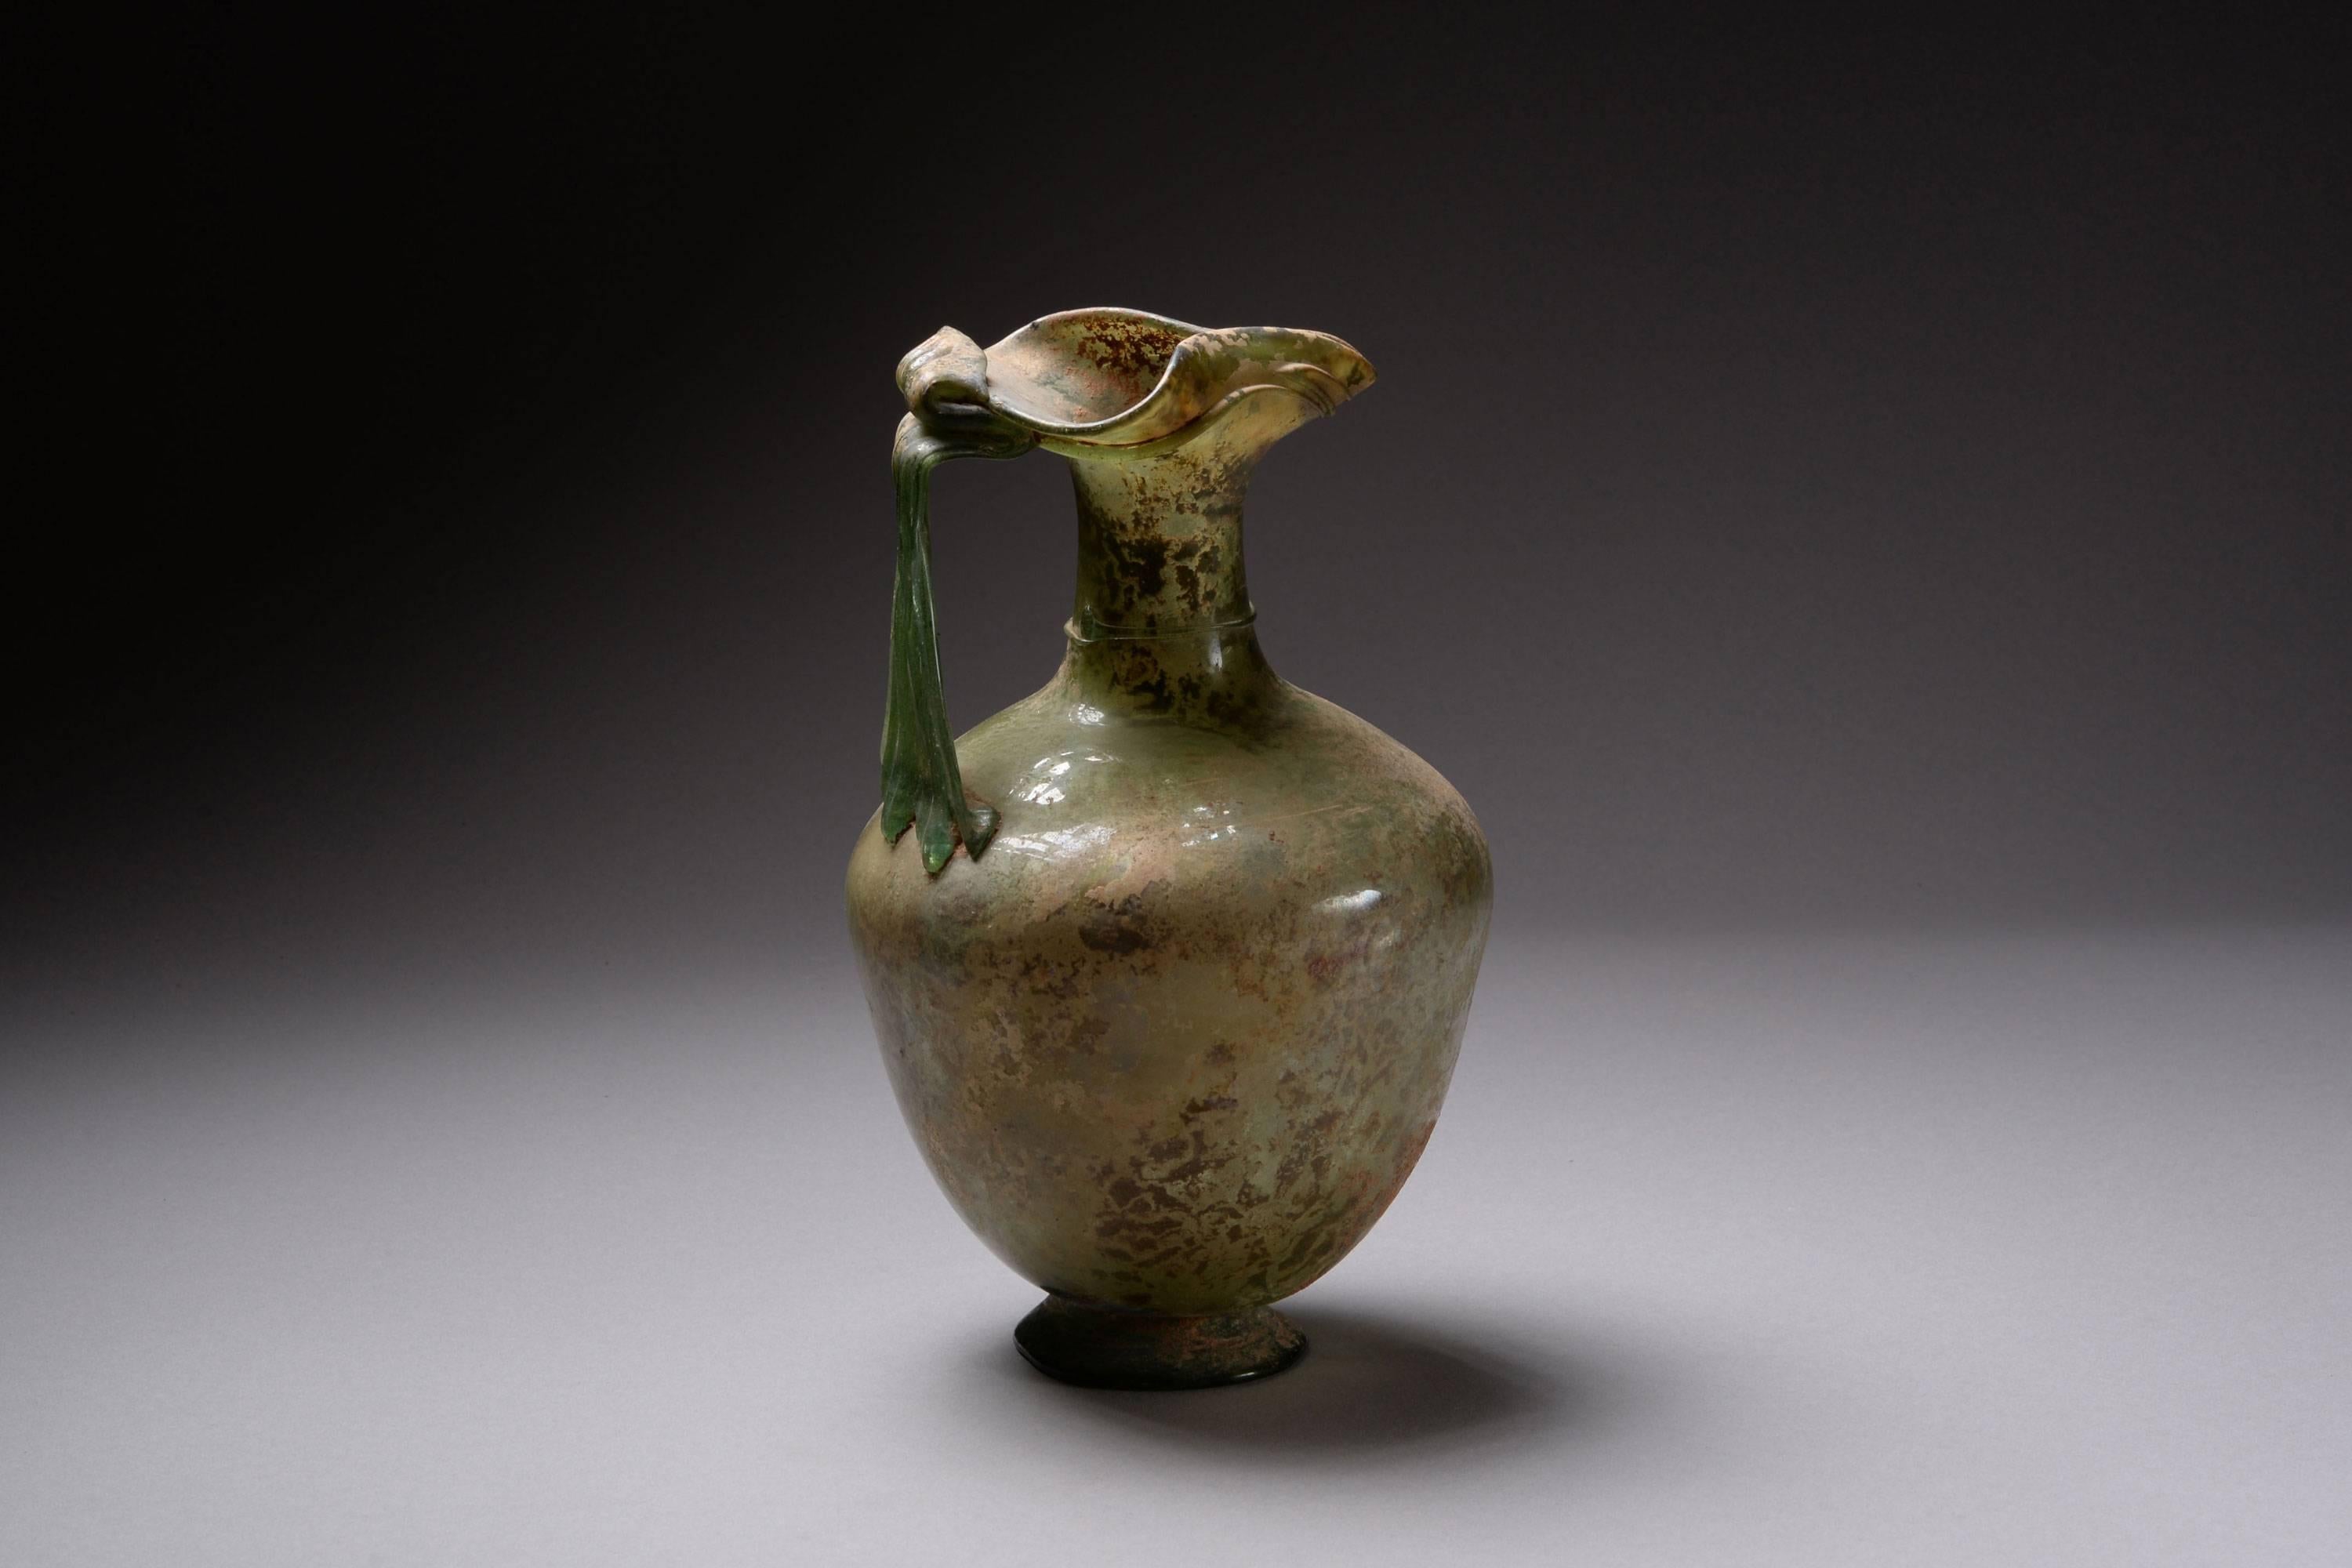 An exceptional, large Roman glass oinochoe or jug, dating to the 3rd to 4th century AD.

Here we see one of the most elegant and refined vessel shapes found in ancient glass.  Free blown, of light green-blue colour, sitting upon an outsplayed